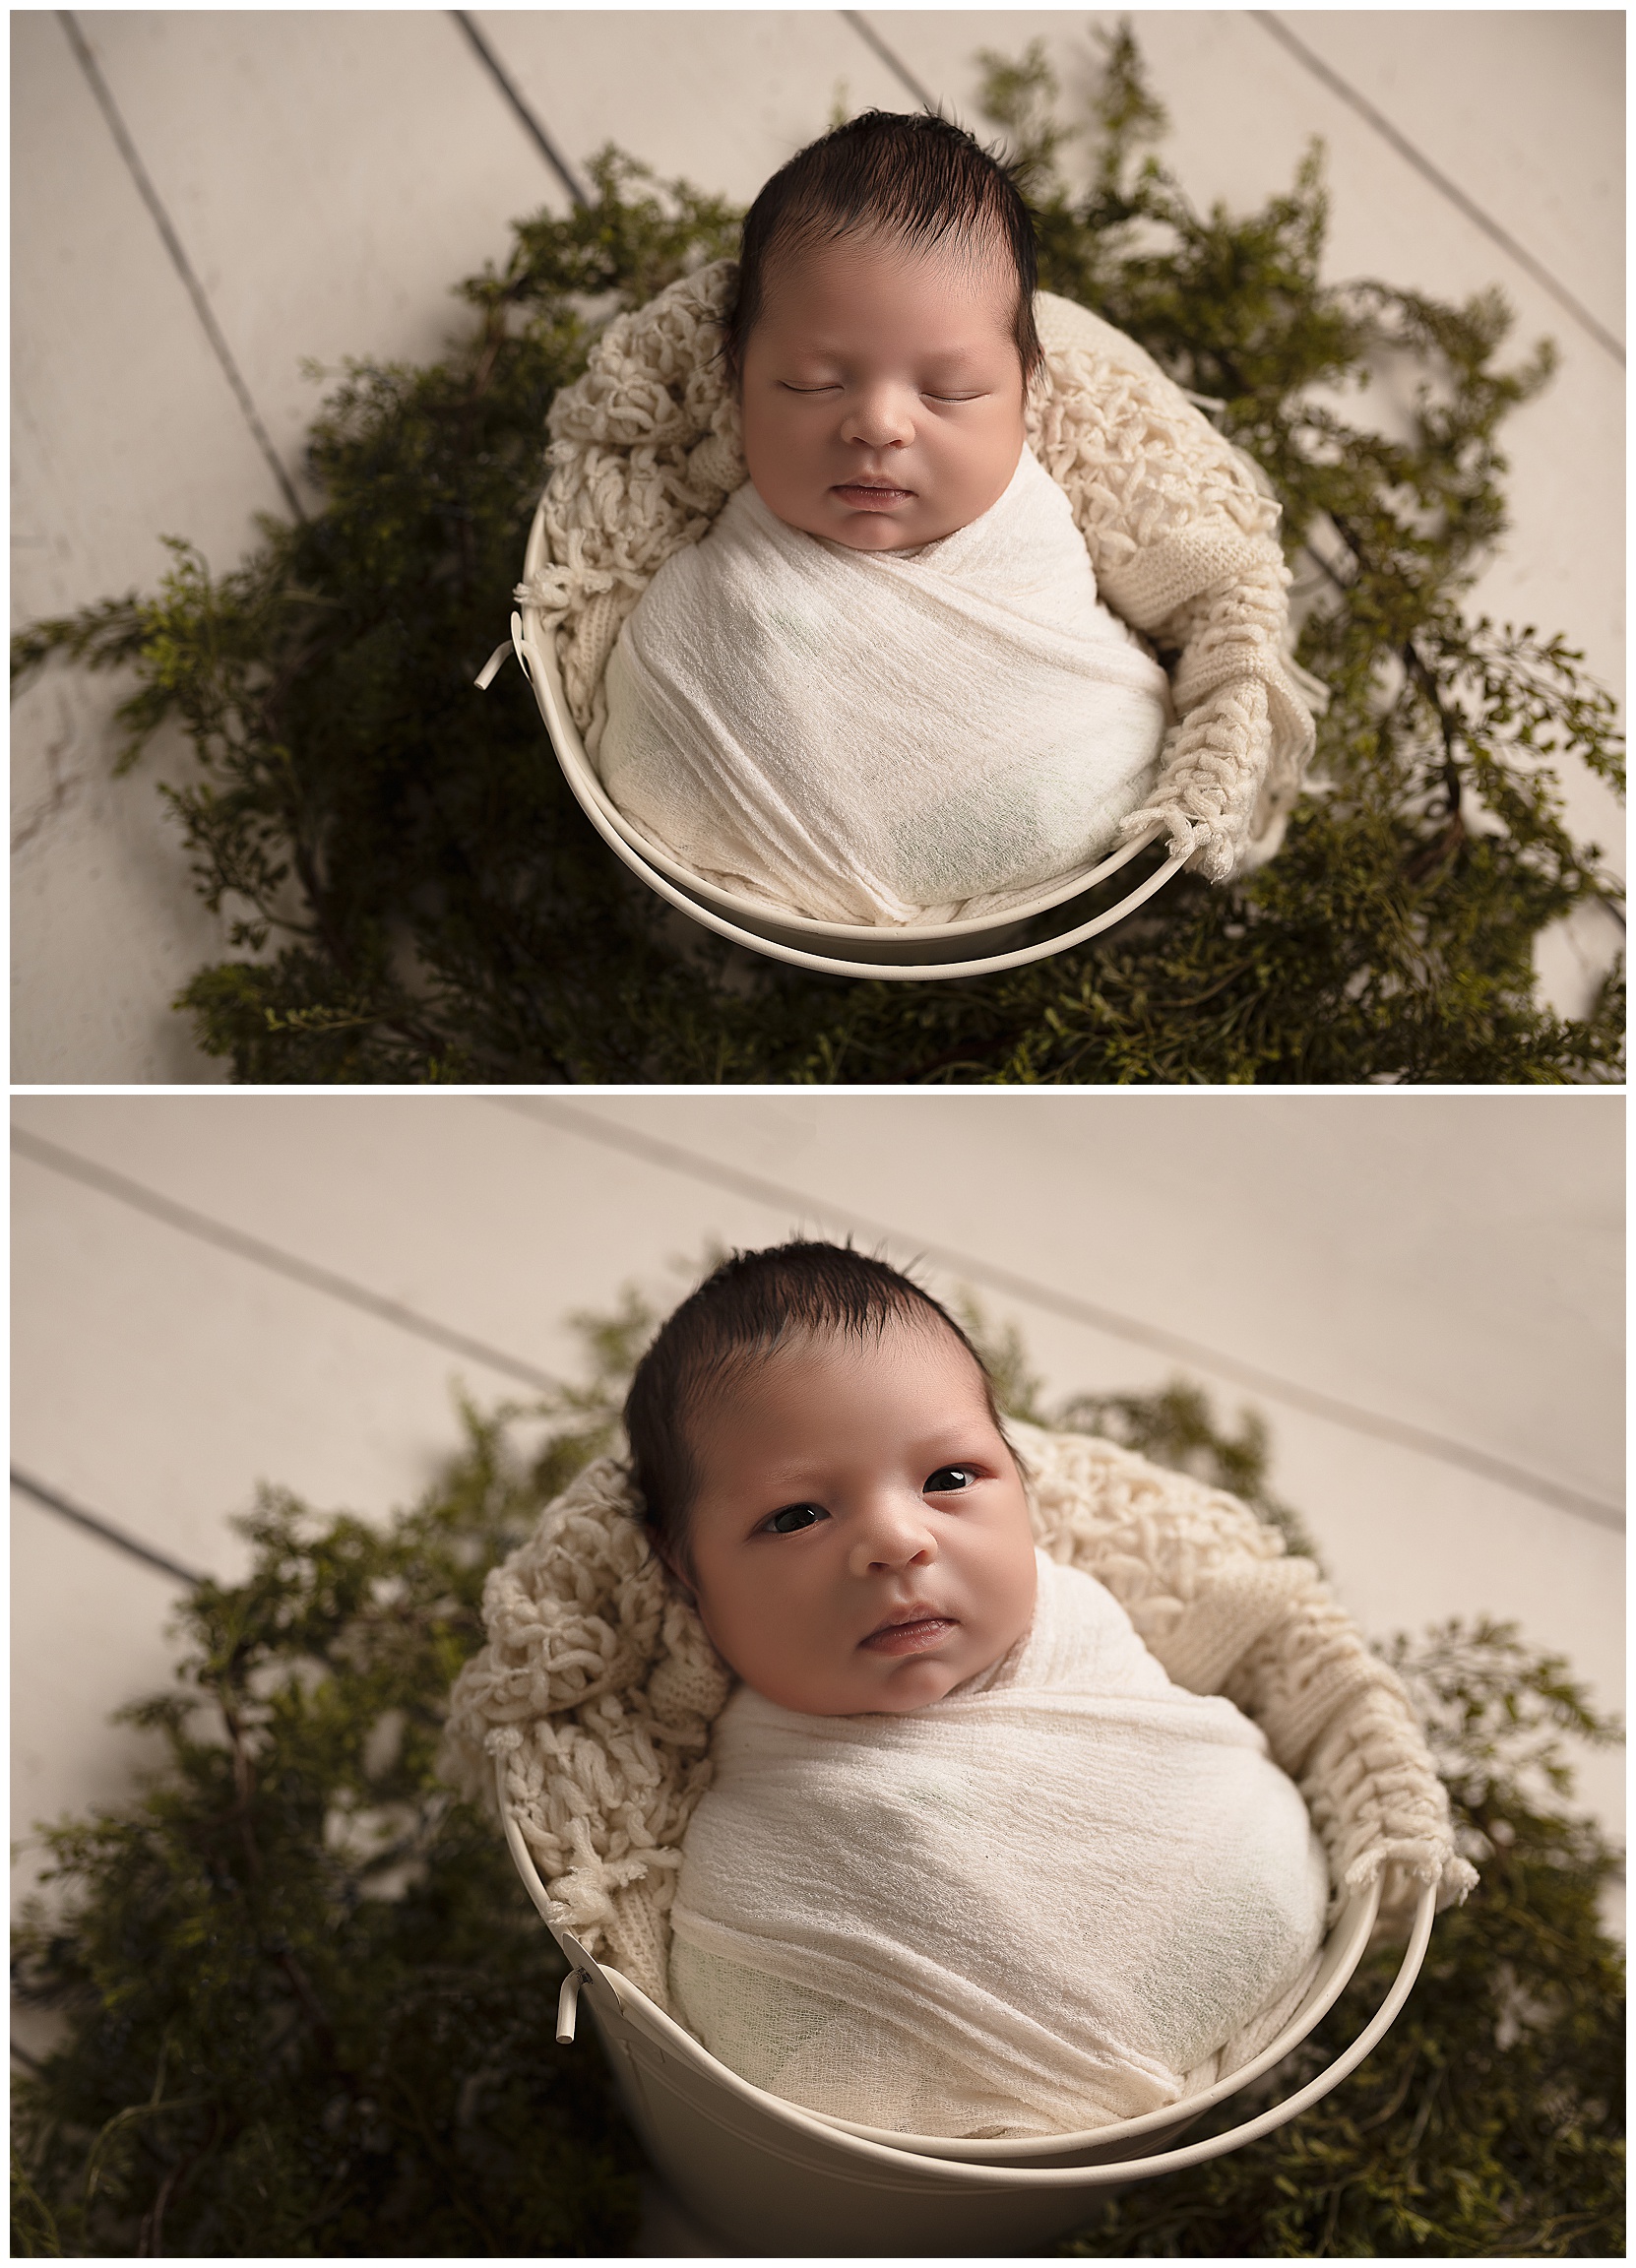 collage of a baby wrapped in a white blanket in a bucket surrounded by greenery